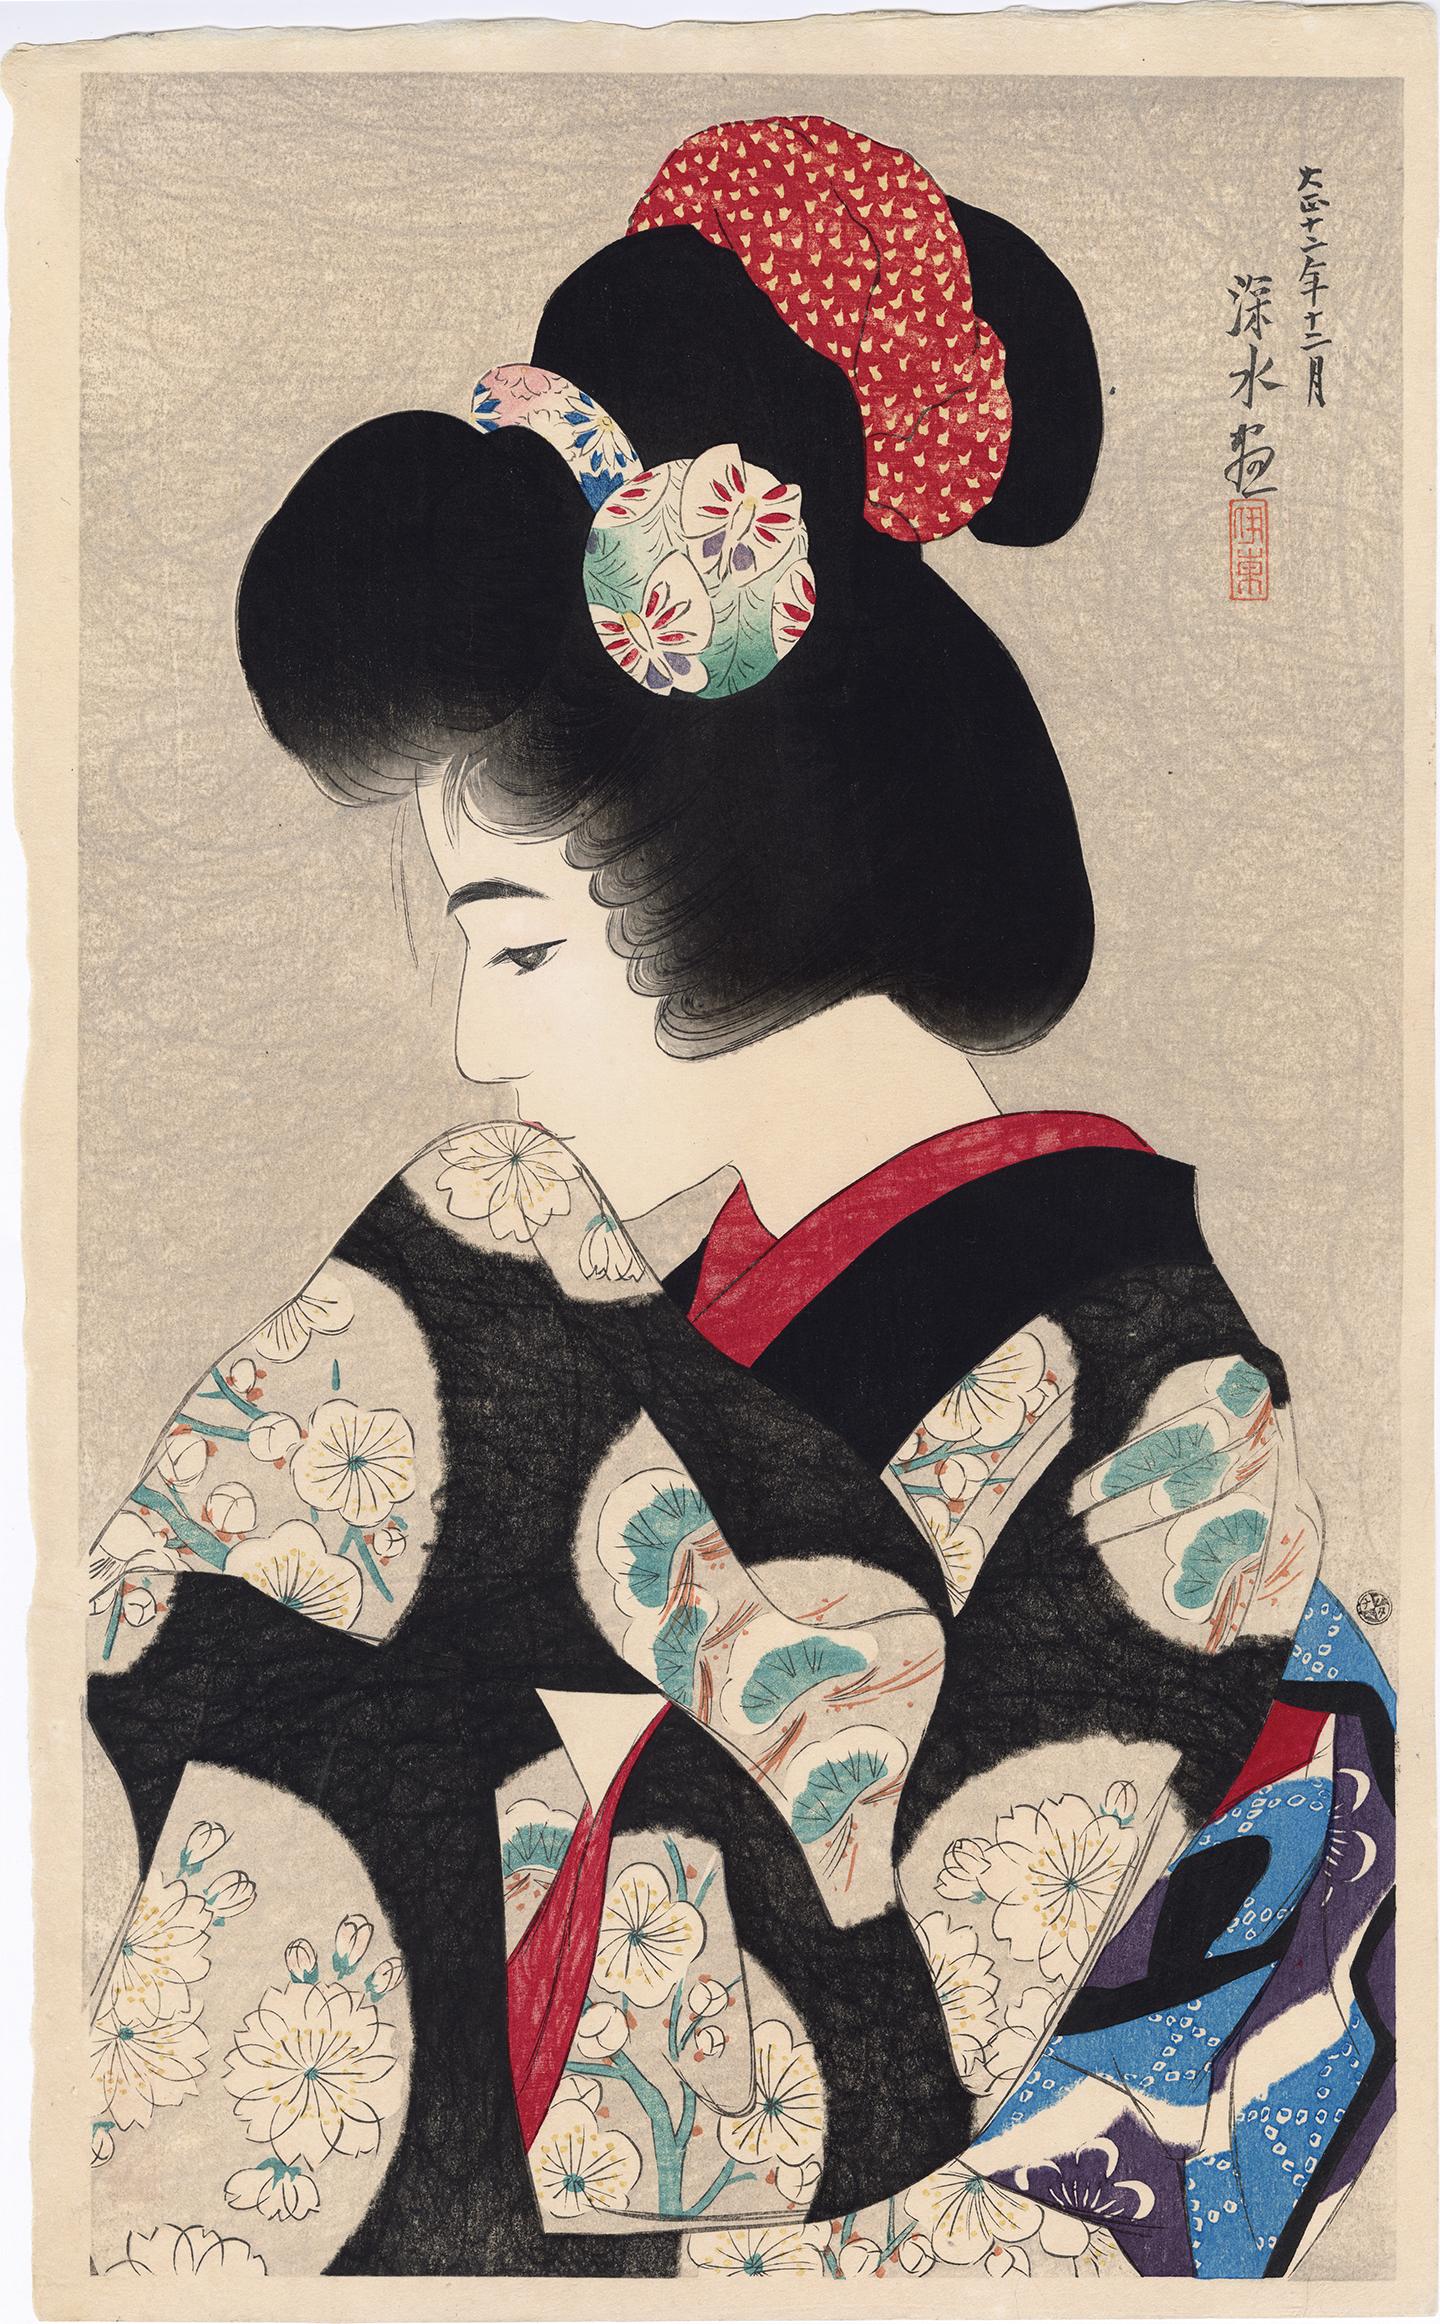 Contemplating the Coming Spring (Junge Maiko, Lehrling Geisha)